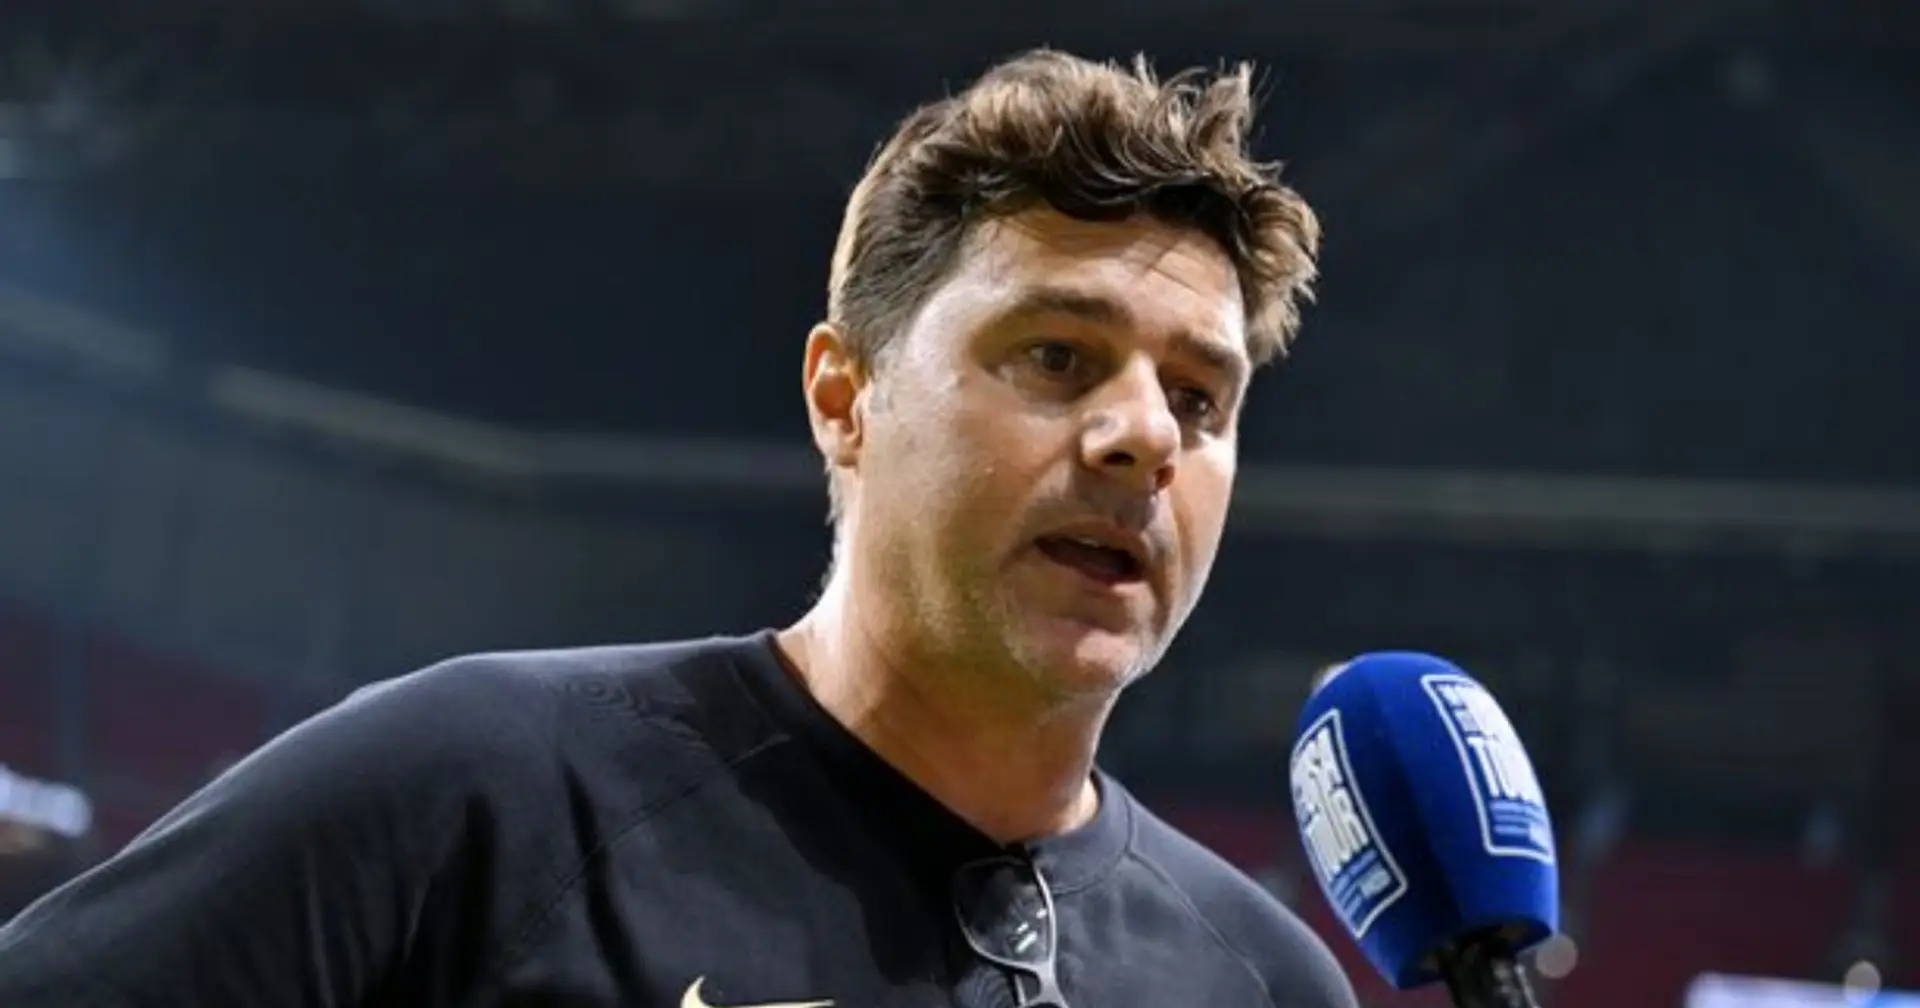 '2025? If owner extends my contract': Poch jokes about Chelsea future